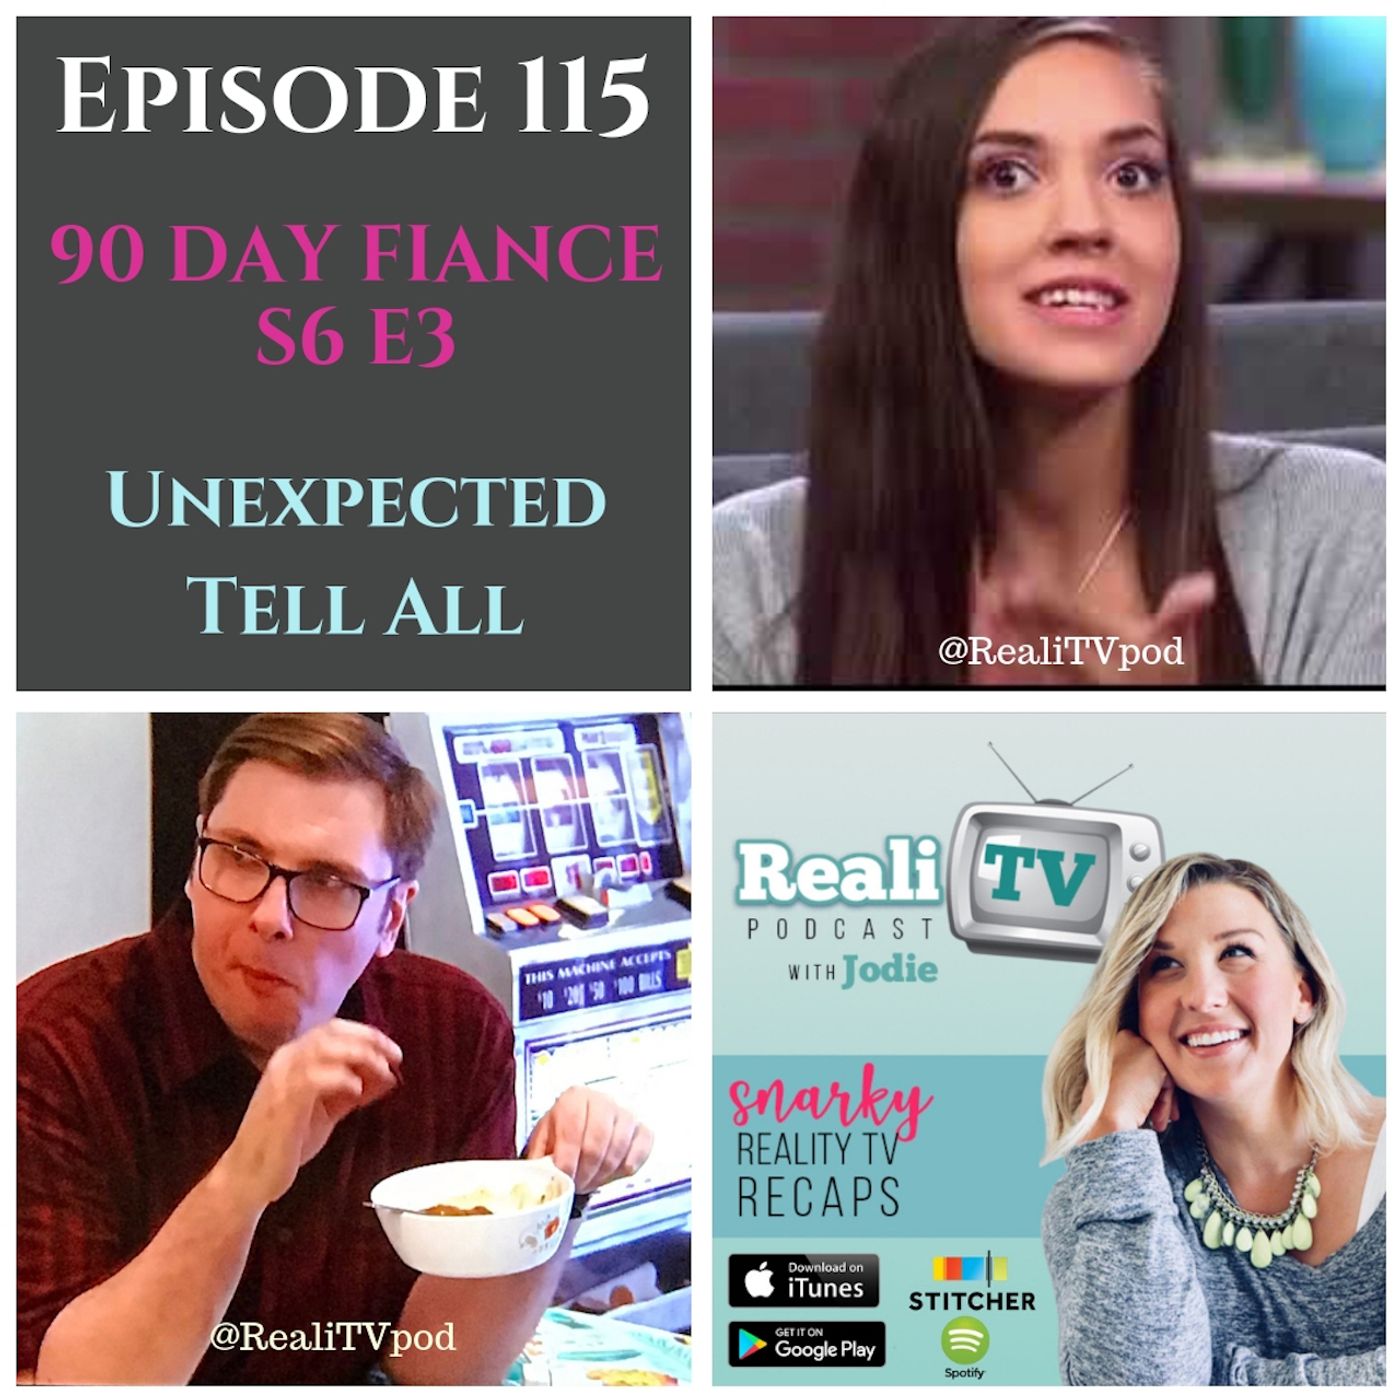 Episode 115: 90 Day Fiance S6E3 & Unexpected